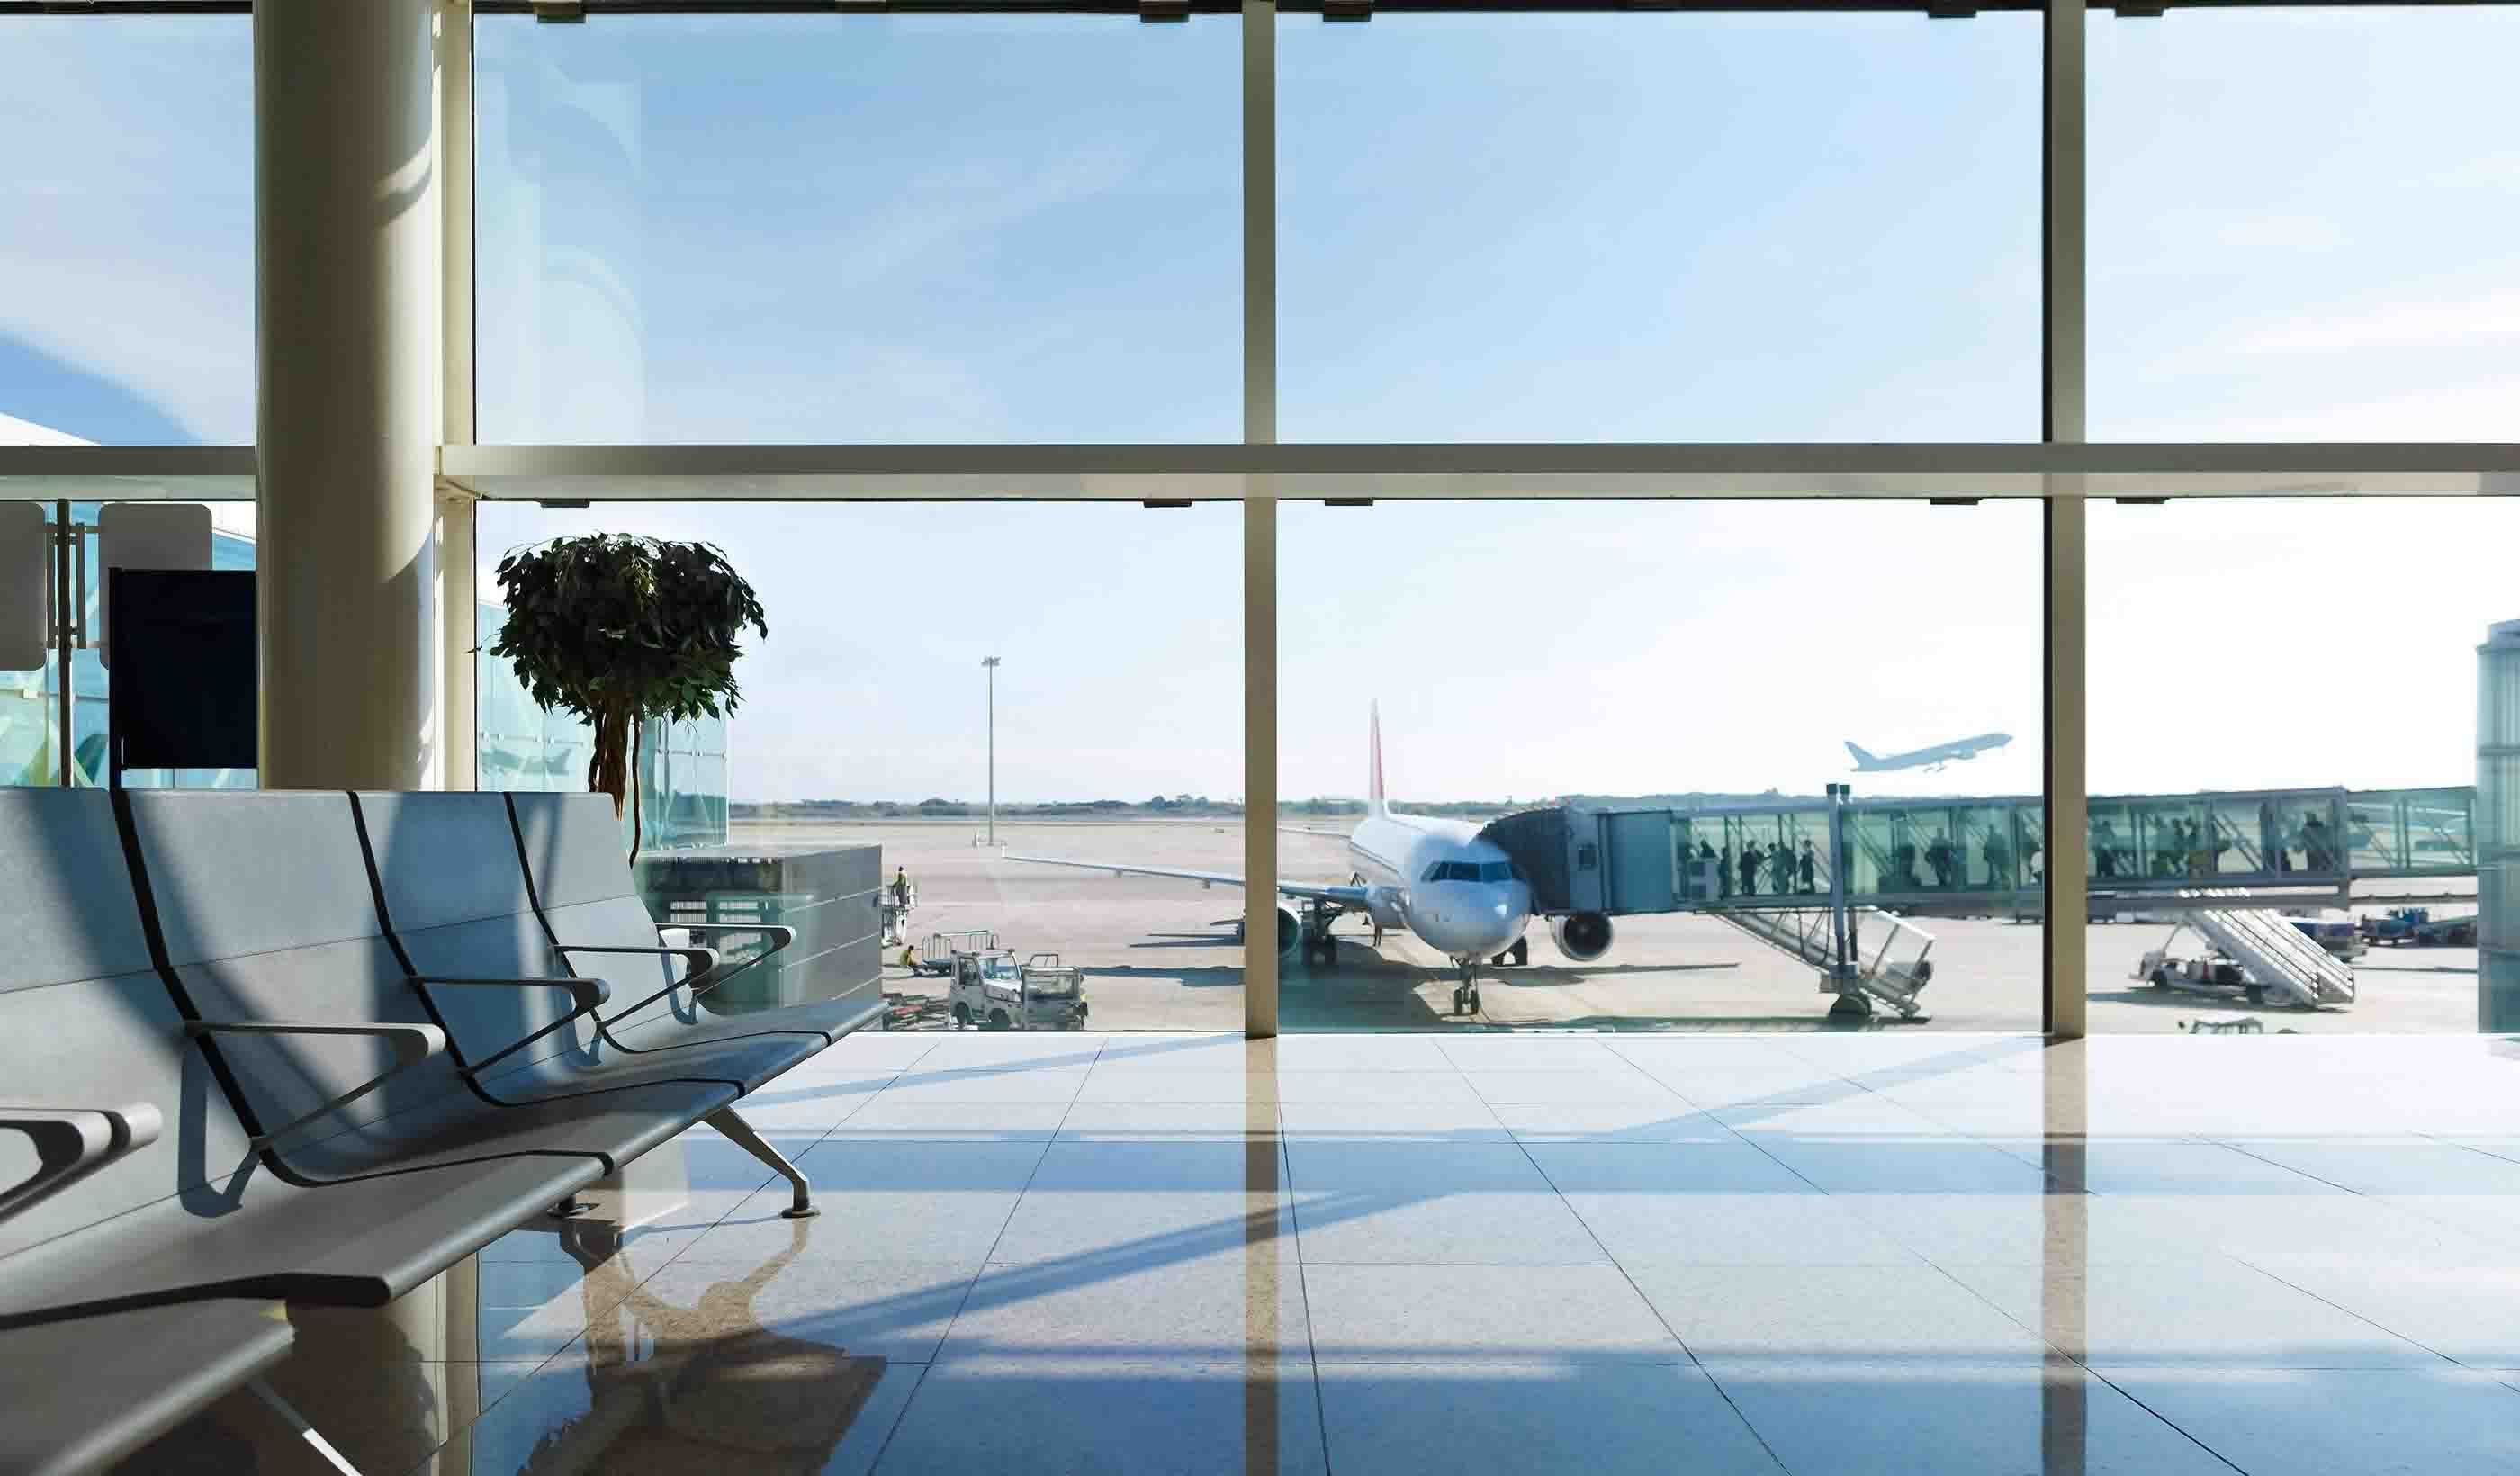 Sustainable airports: How terminals can reduce carbon emissions for a net zero future